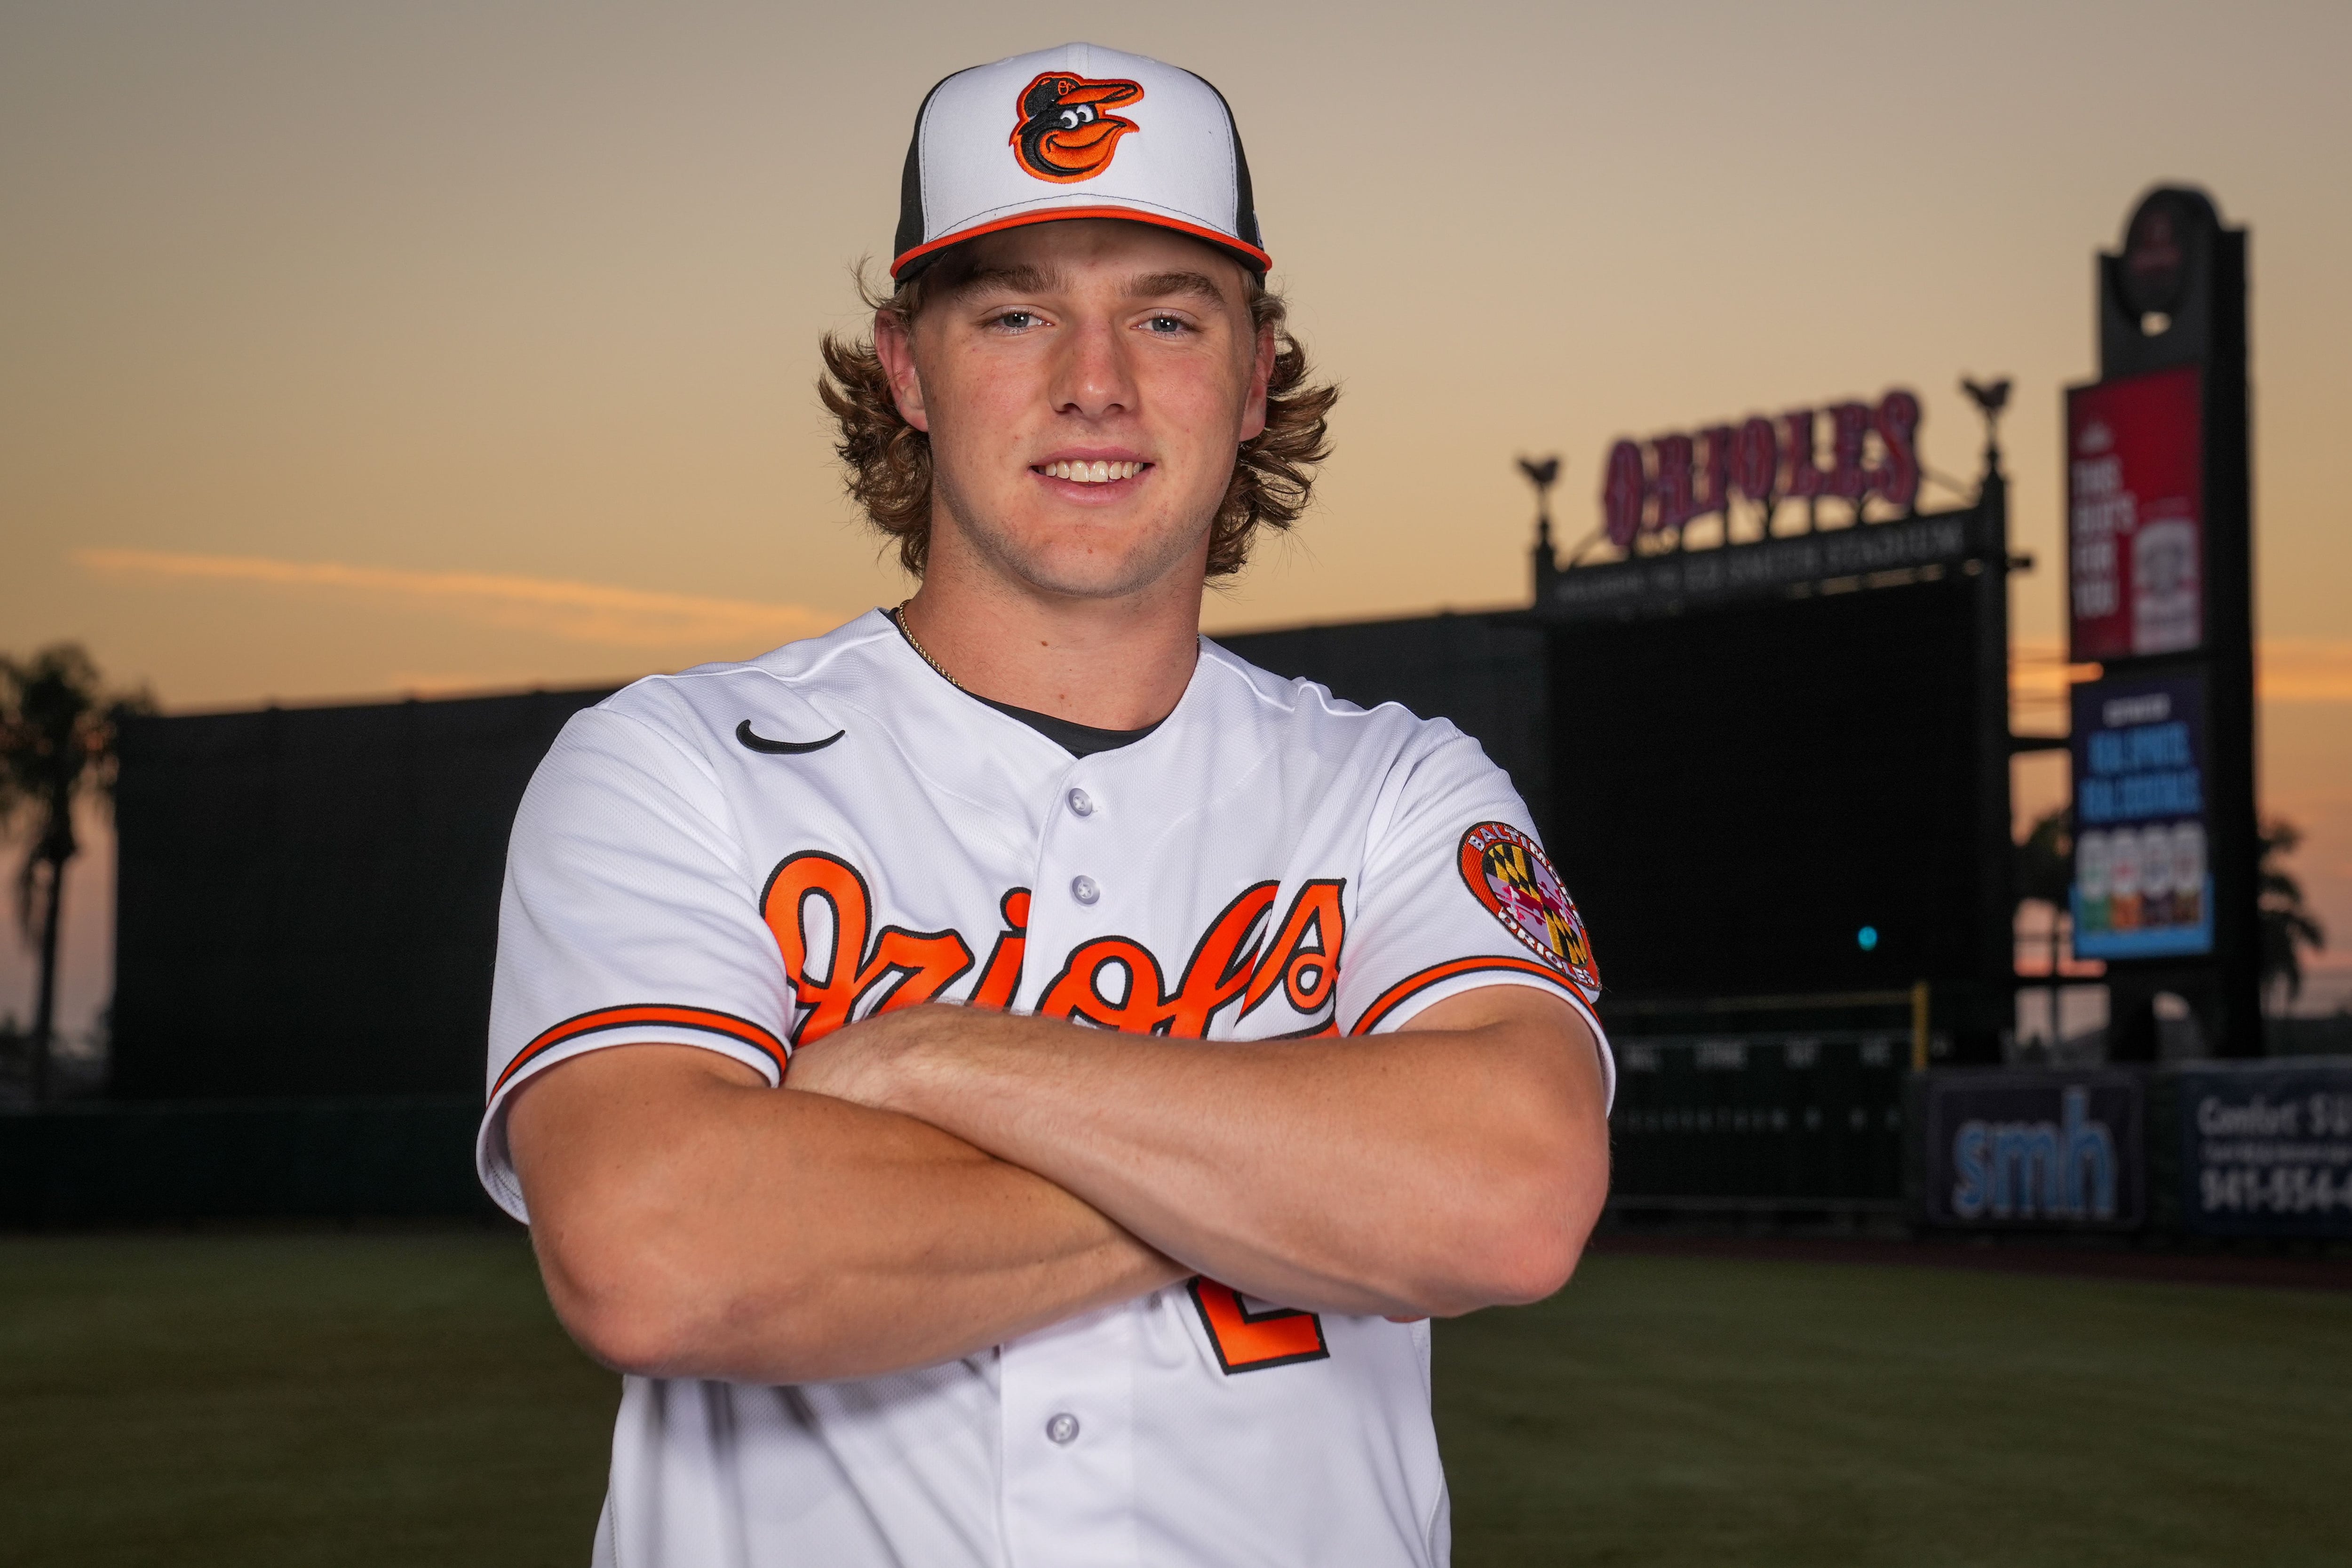 Orioles prospect Gunnar Henderson relied on family to train for